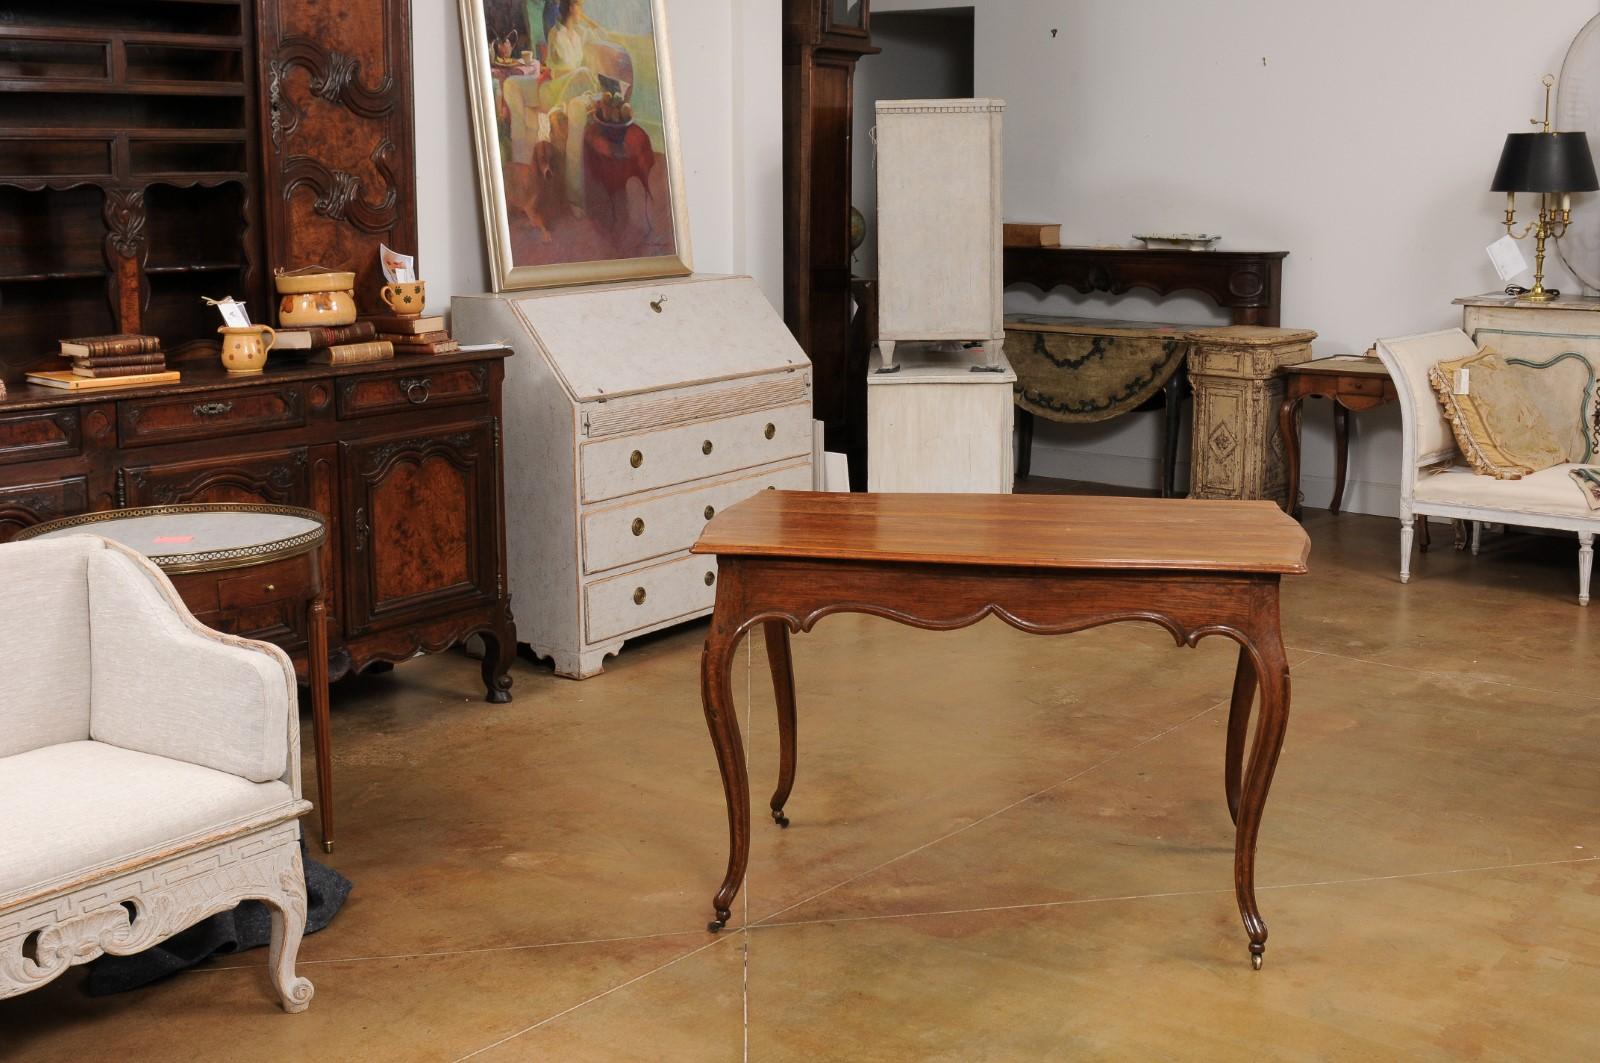 Italian Rococo Early 19th Century Oak Table with Carved Apron and Cabriole Legs For Sale 3